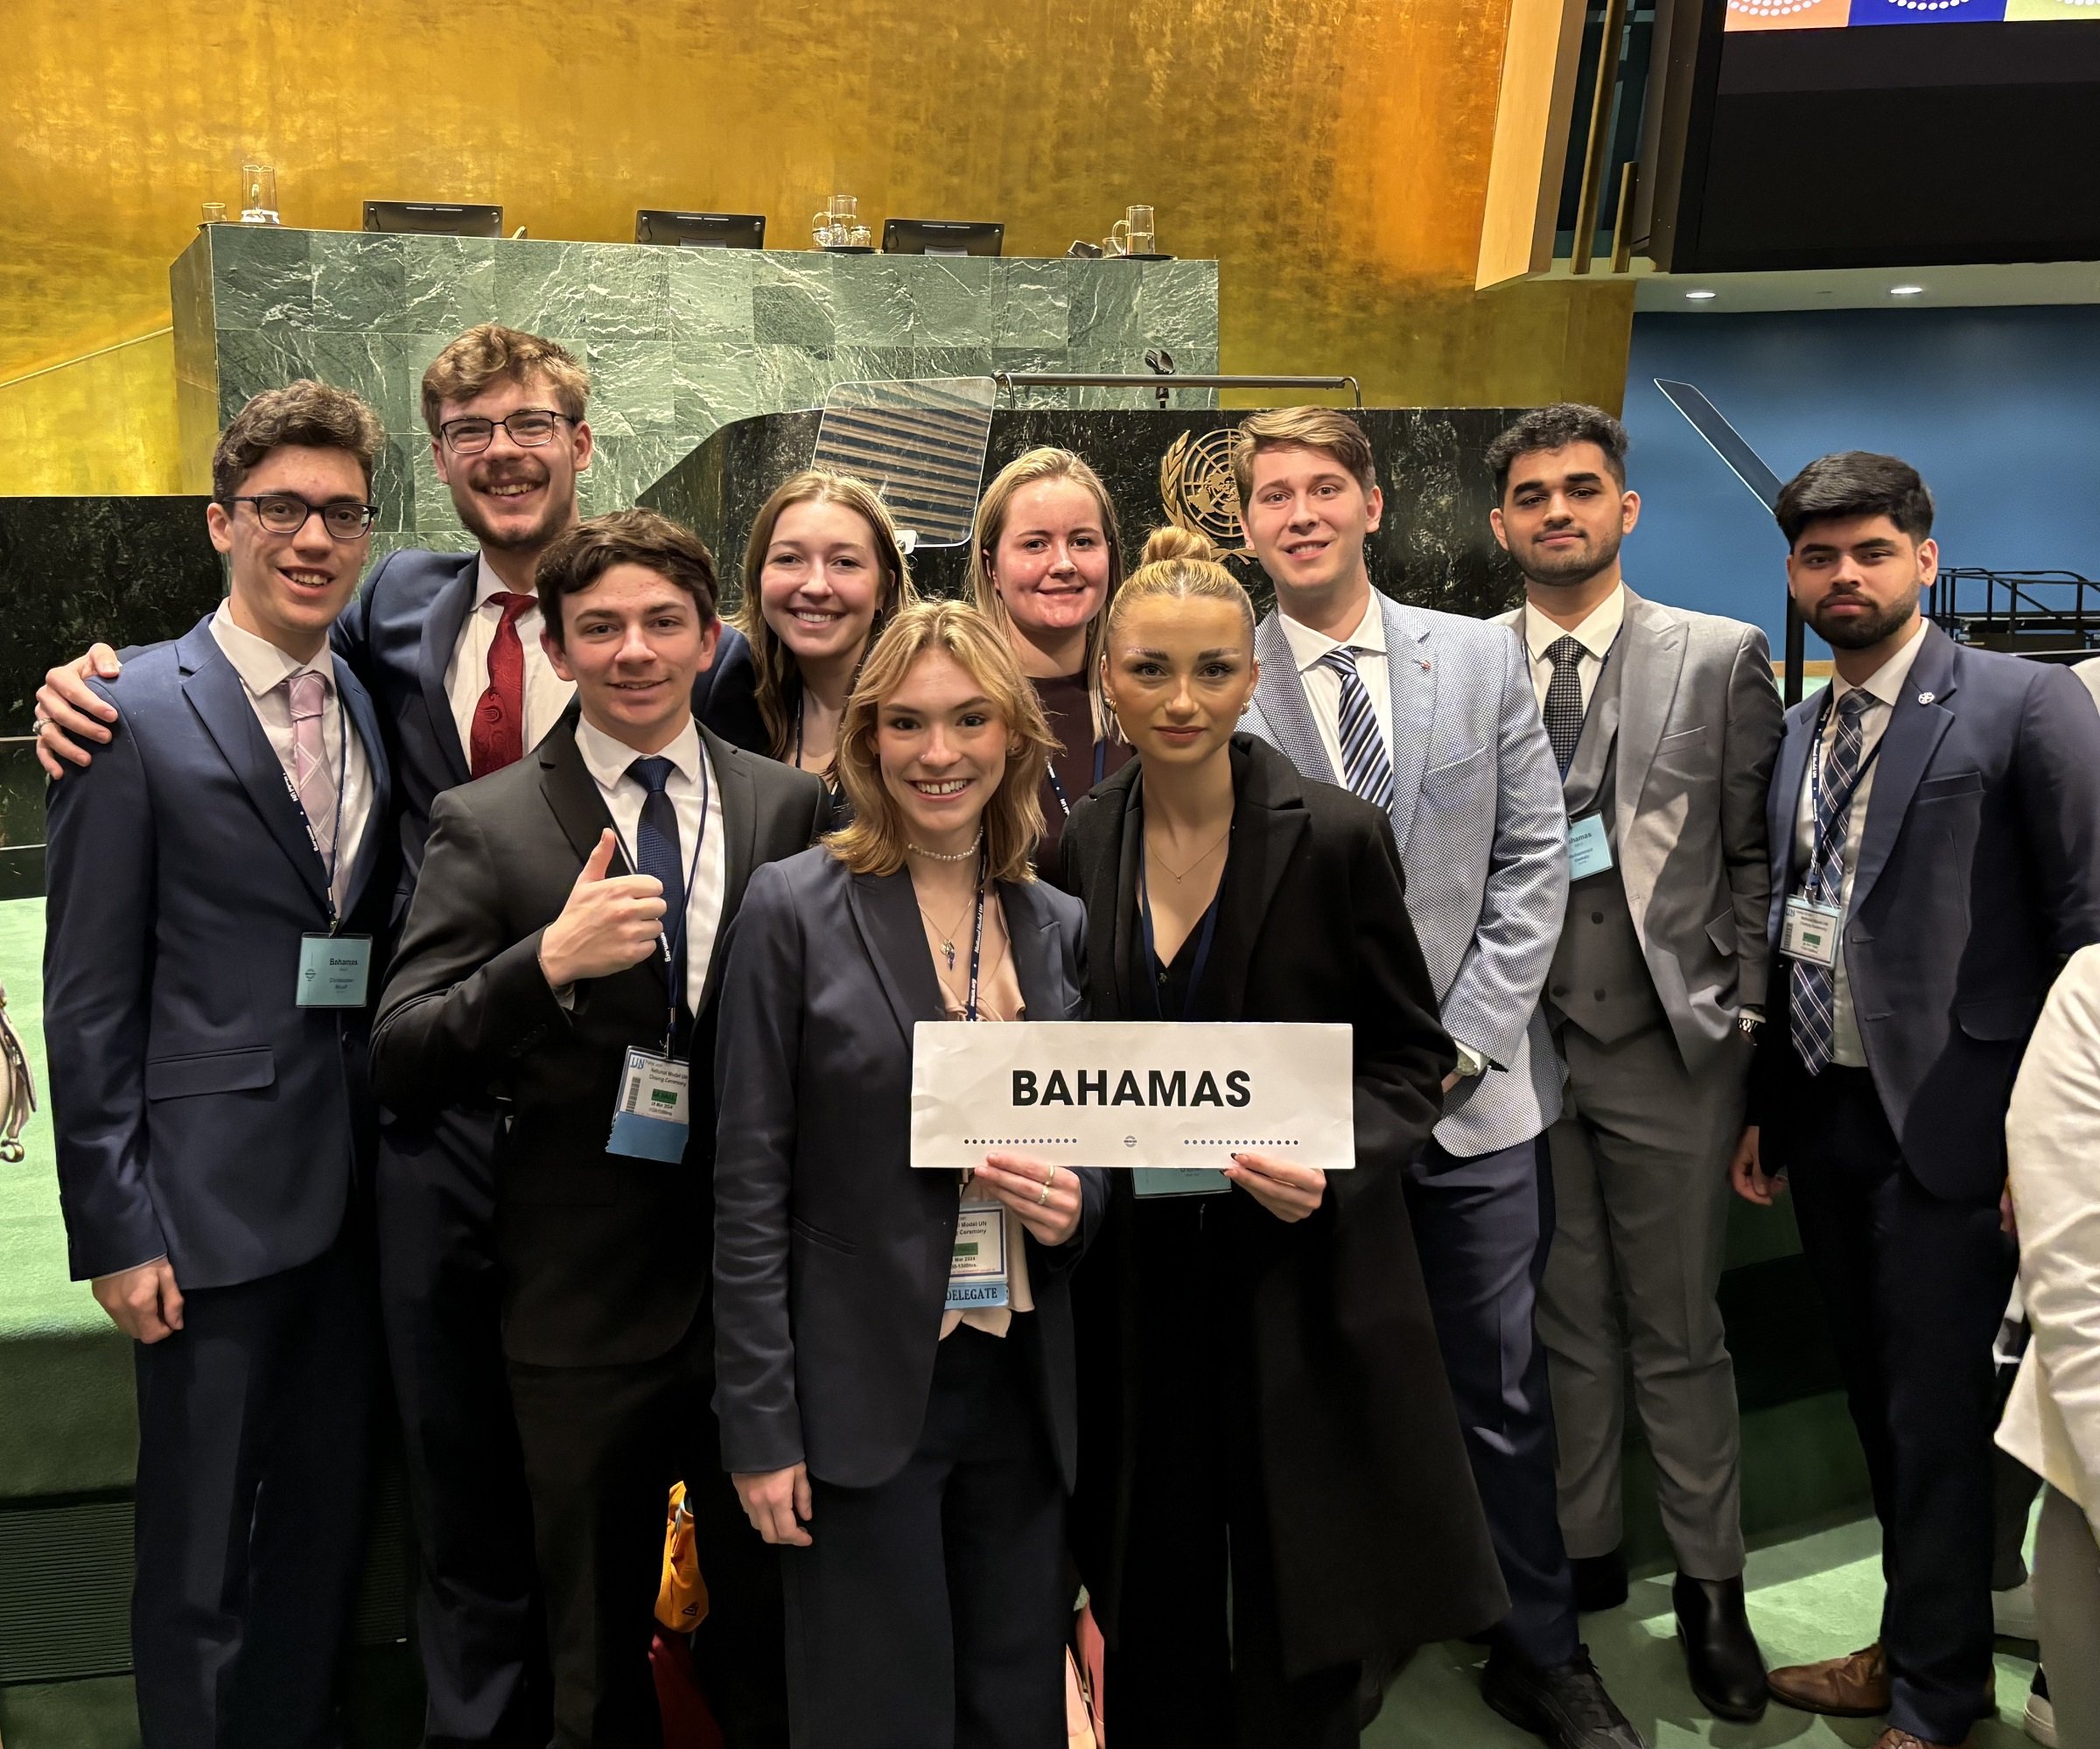  SMU’s team represented The Bahamas at Model UN in NYC 